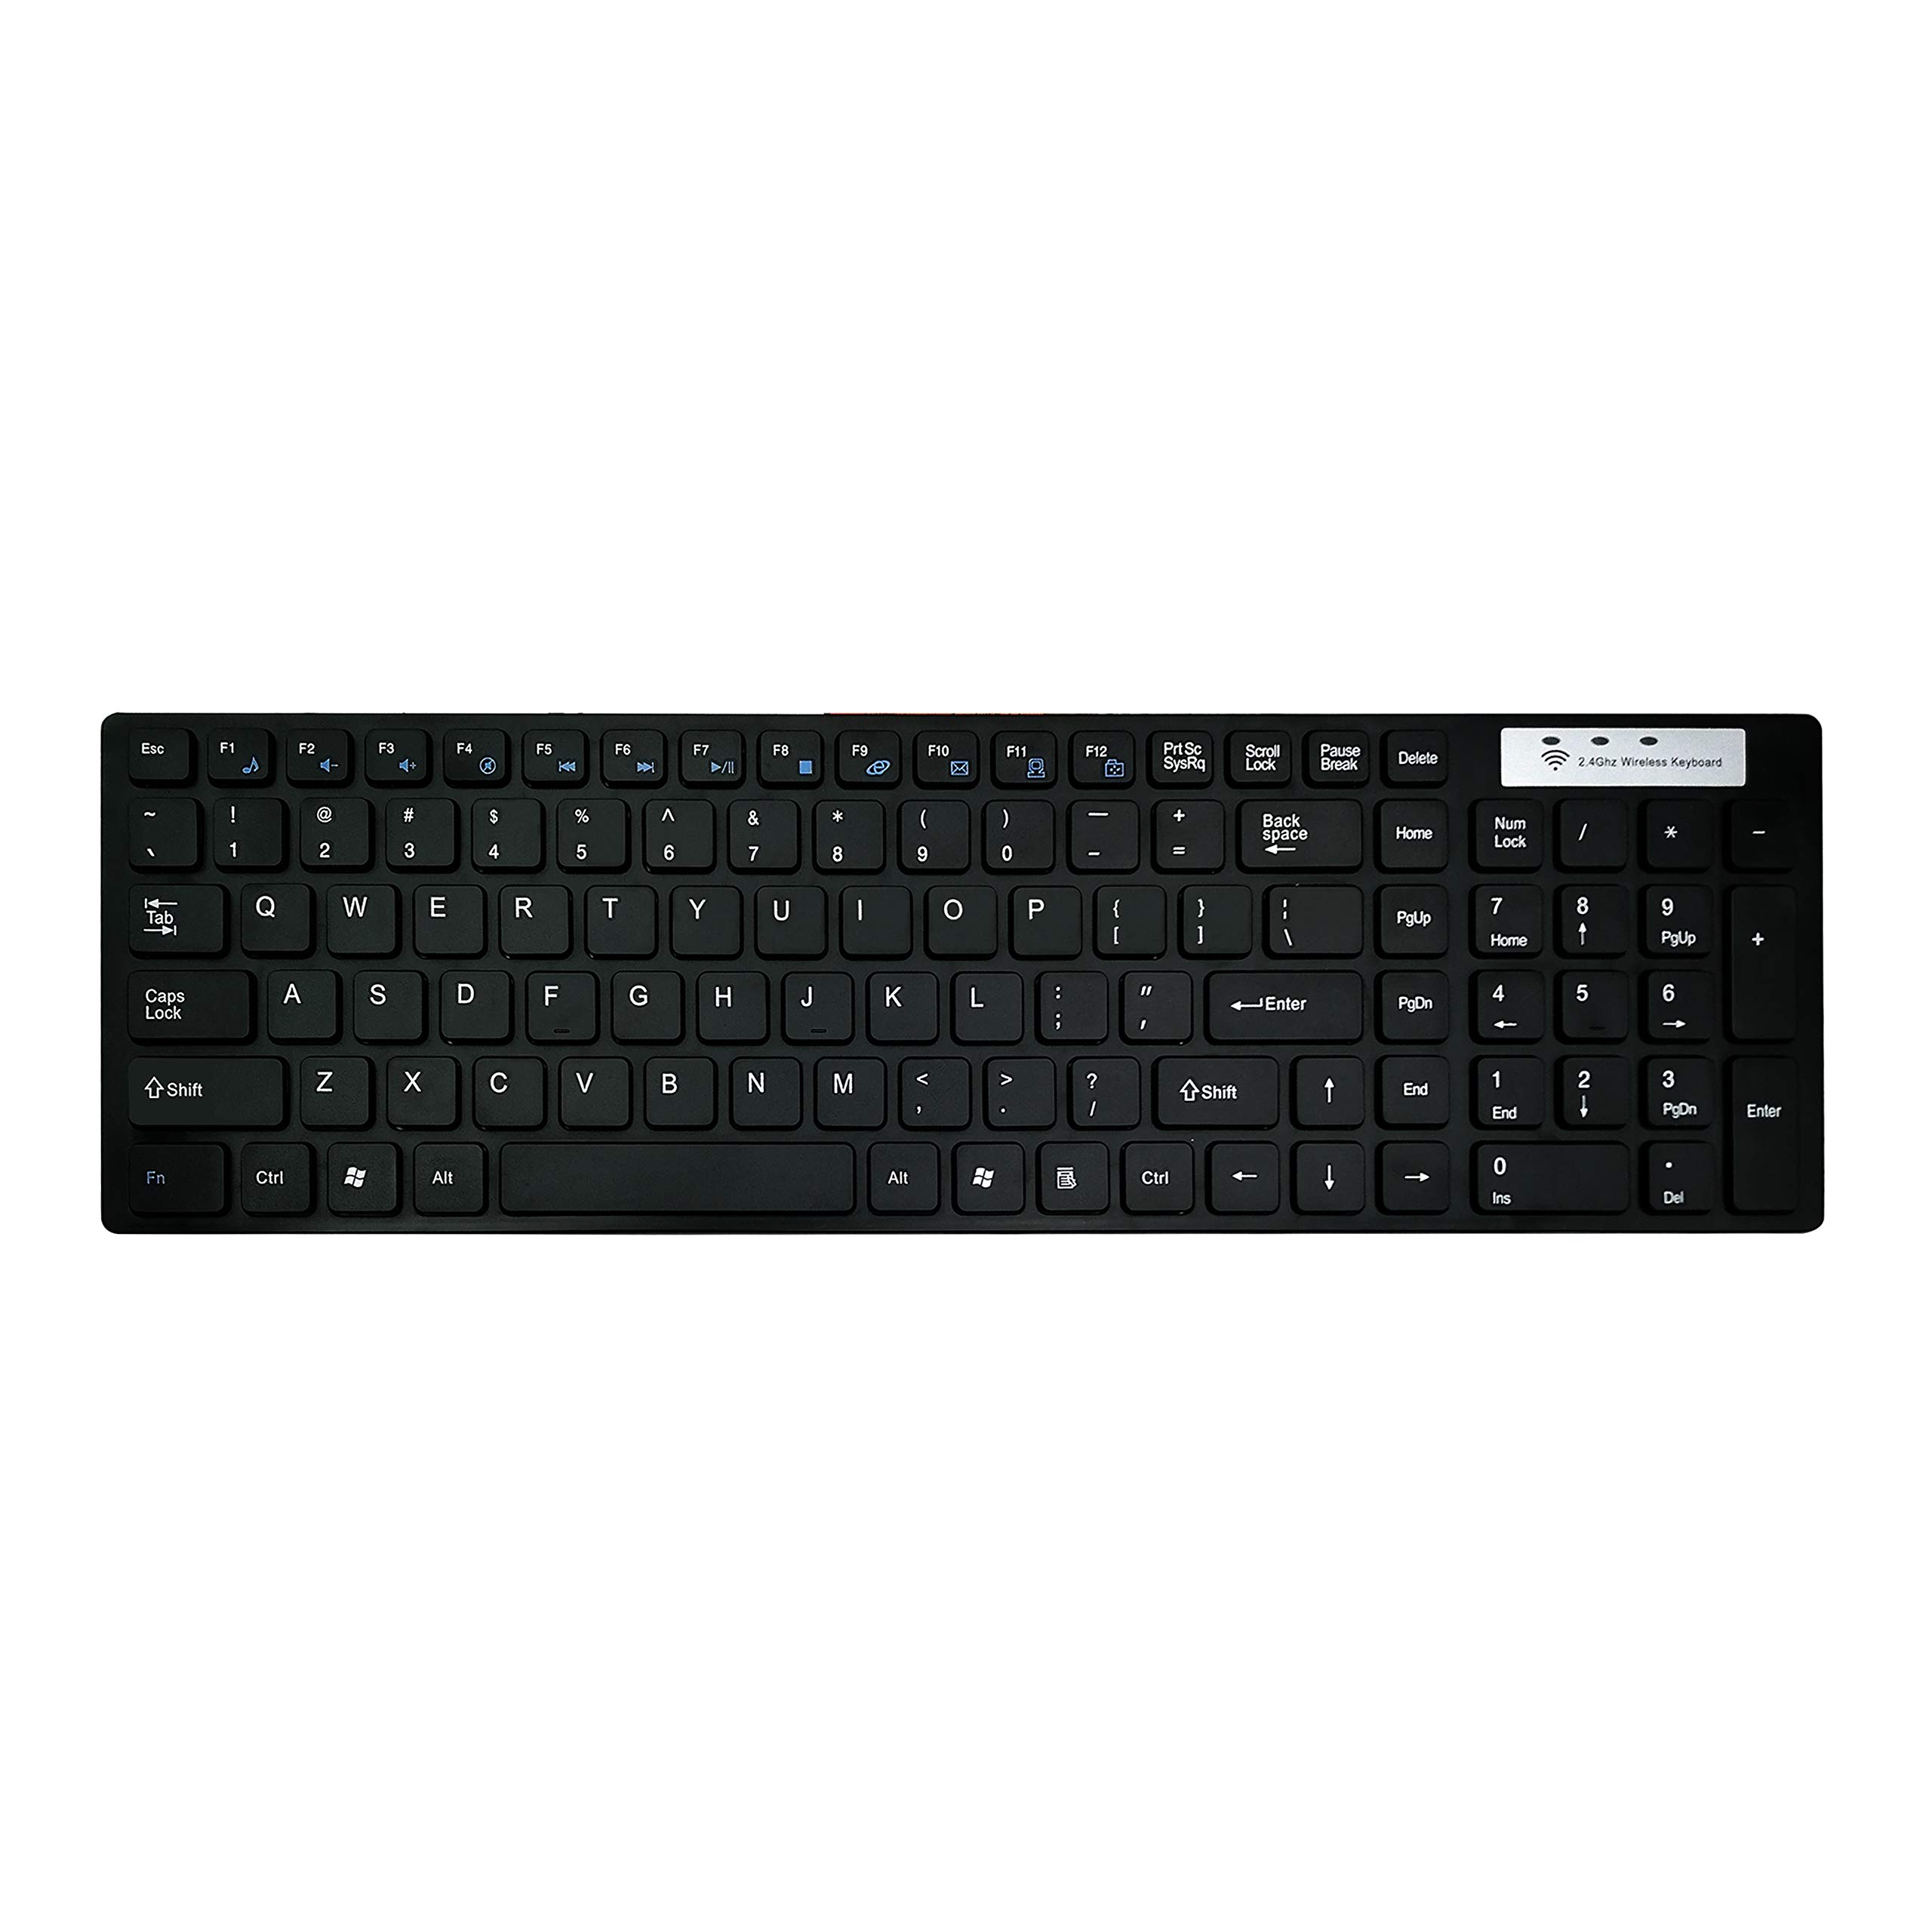 Supersonic SC-530KBM Ultra Thin Wireless Keyboard/Mouse Combo, Comfortable Typing, 15° Tilted Angle, 104 Keys, Auto Sleep, 2.4G Wireless Dongle, 33FT Range, Compatible with Android, Windows and Mac